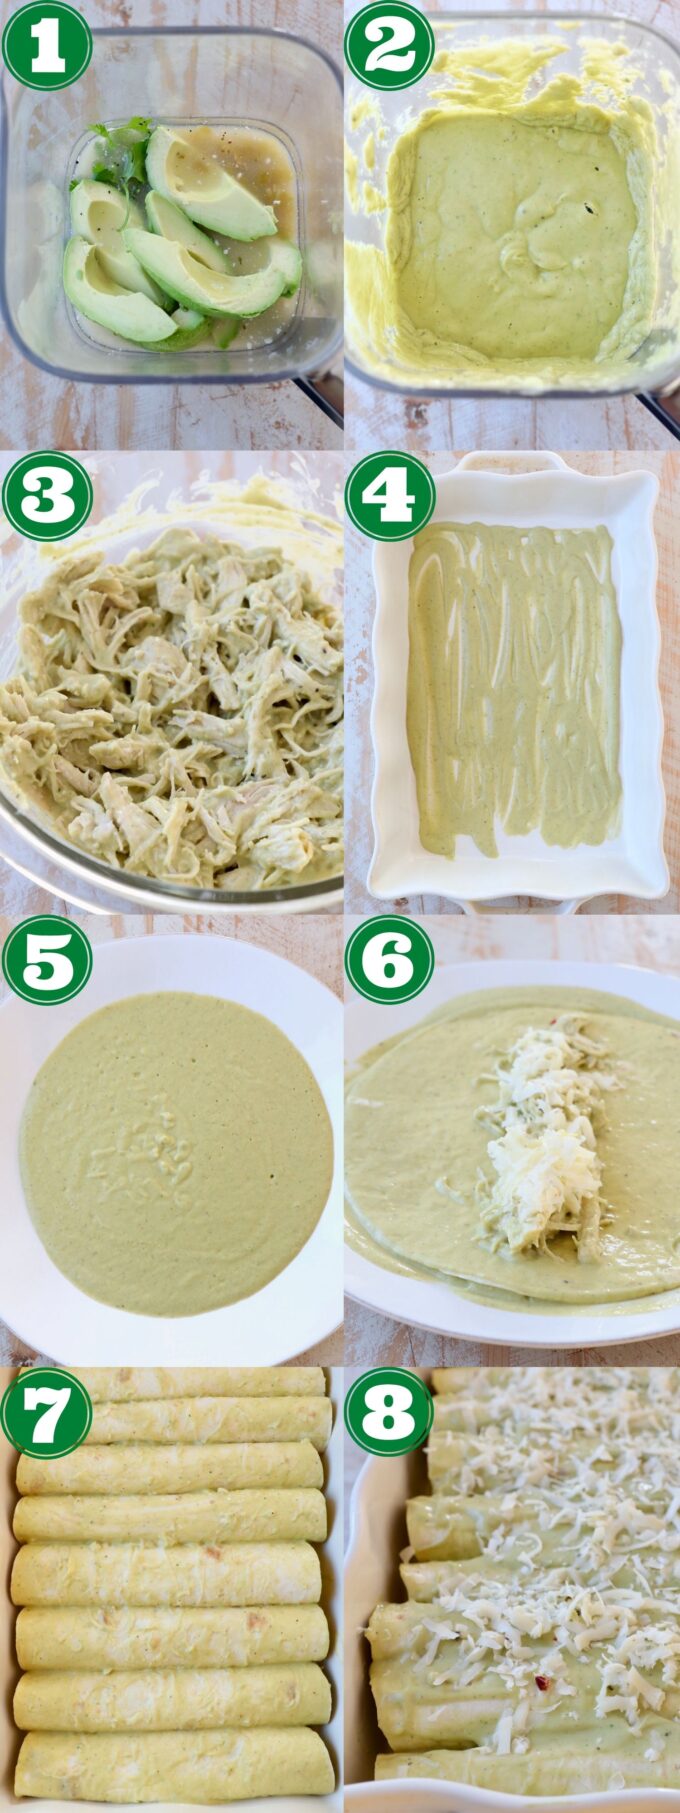 collage of images showing how to make chicken enchiladas with green sauce